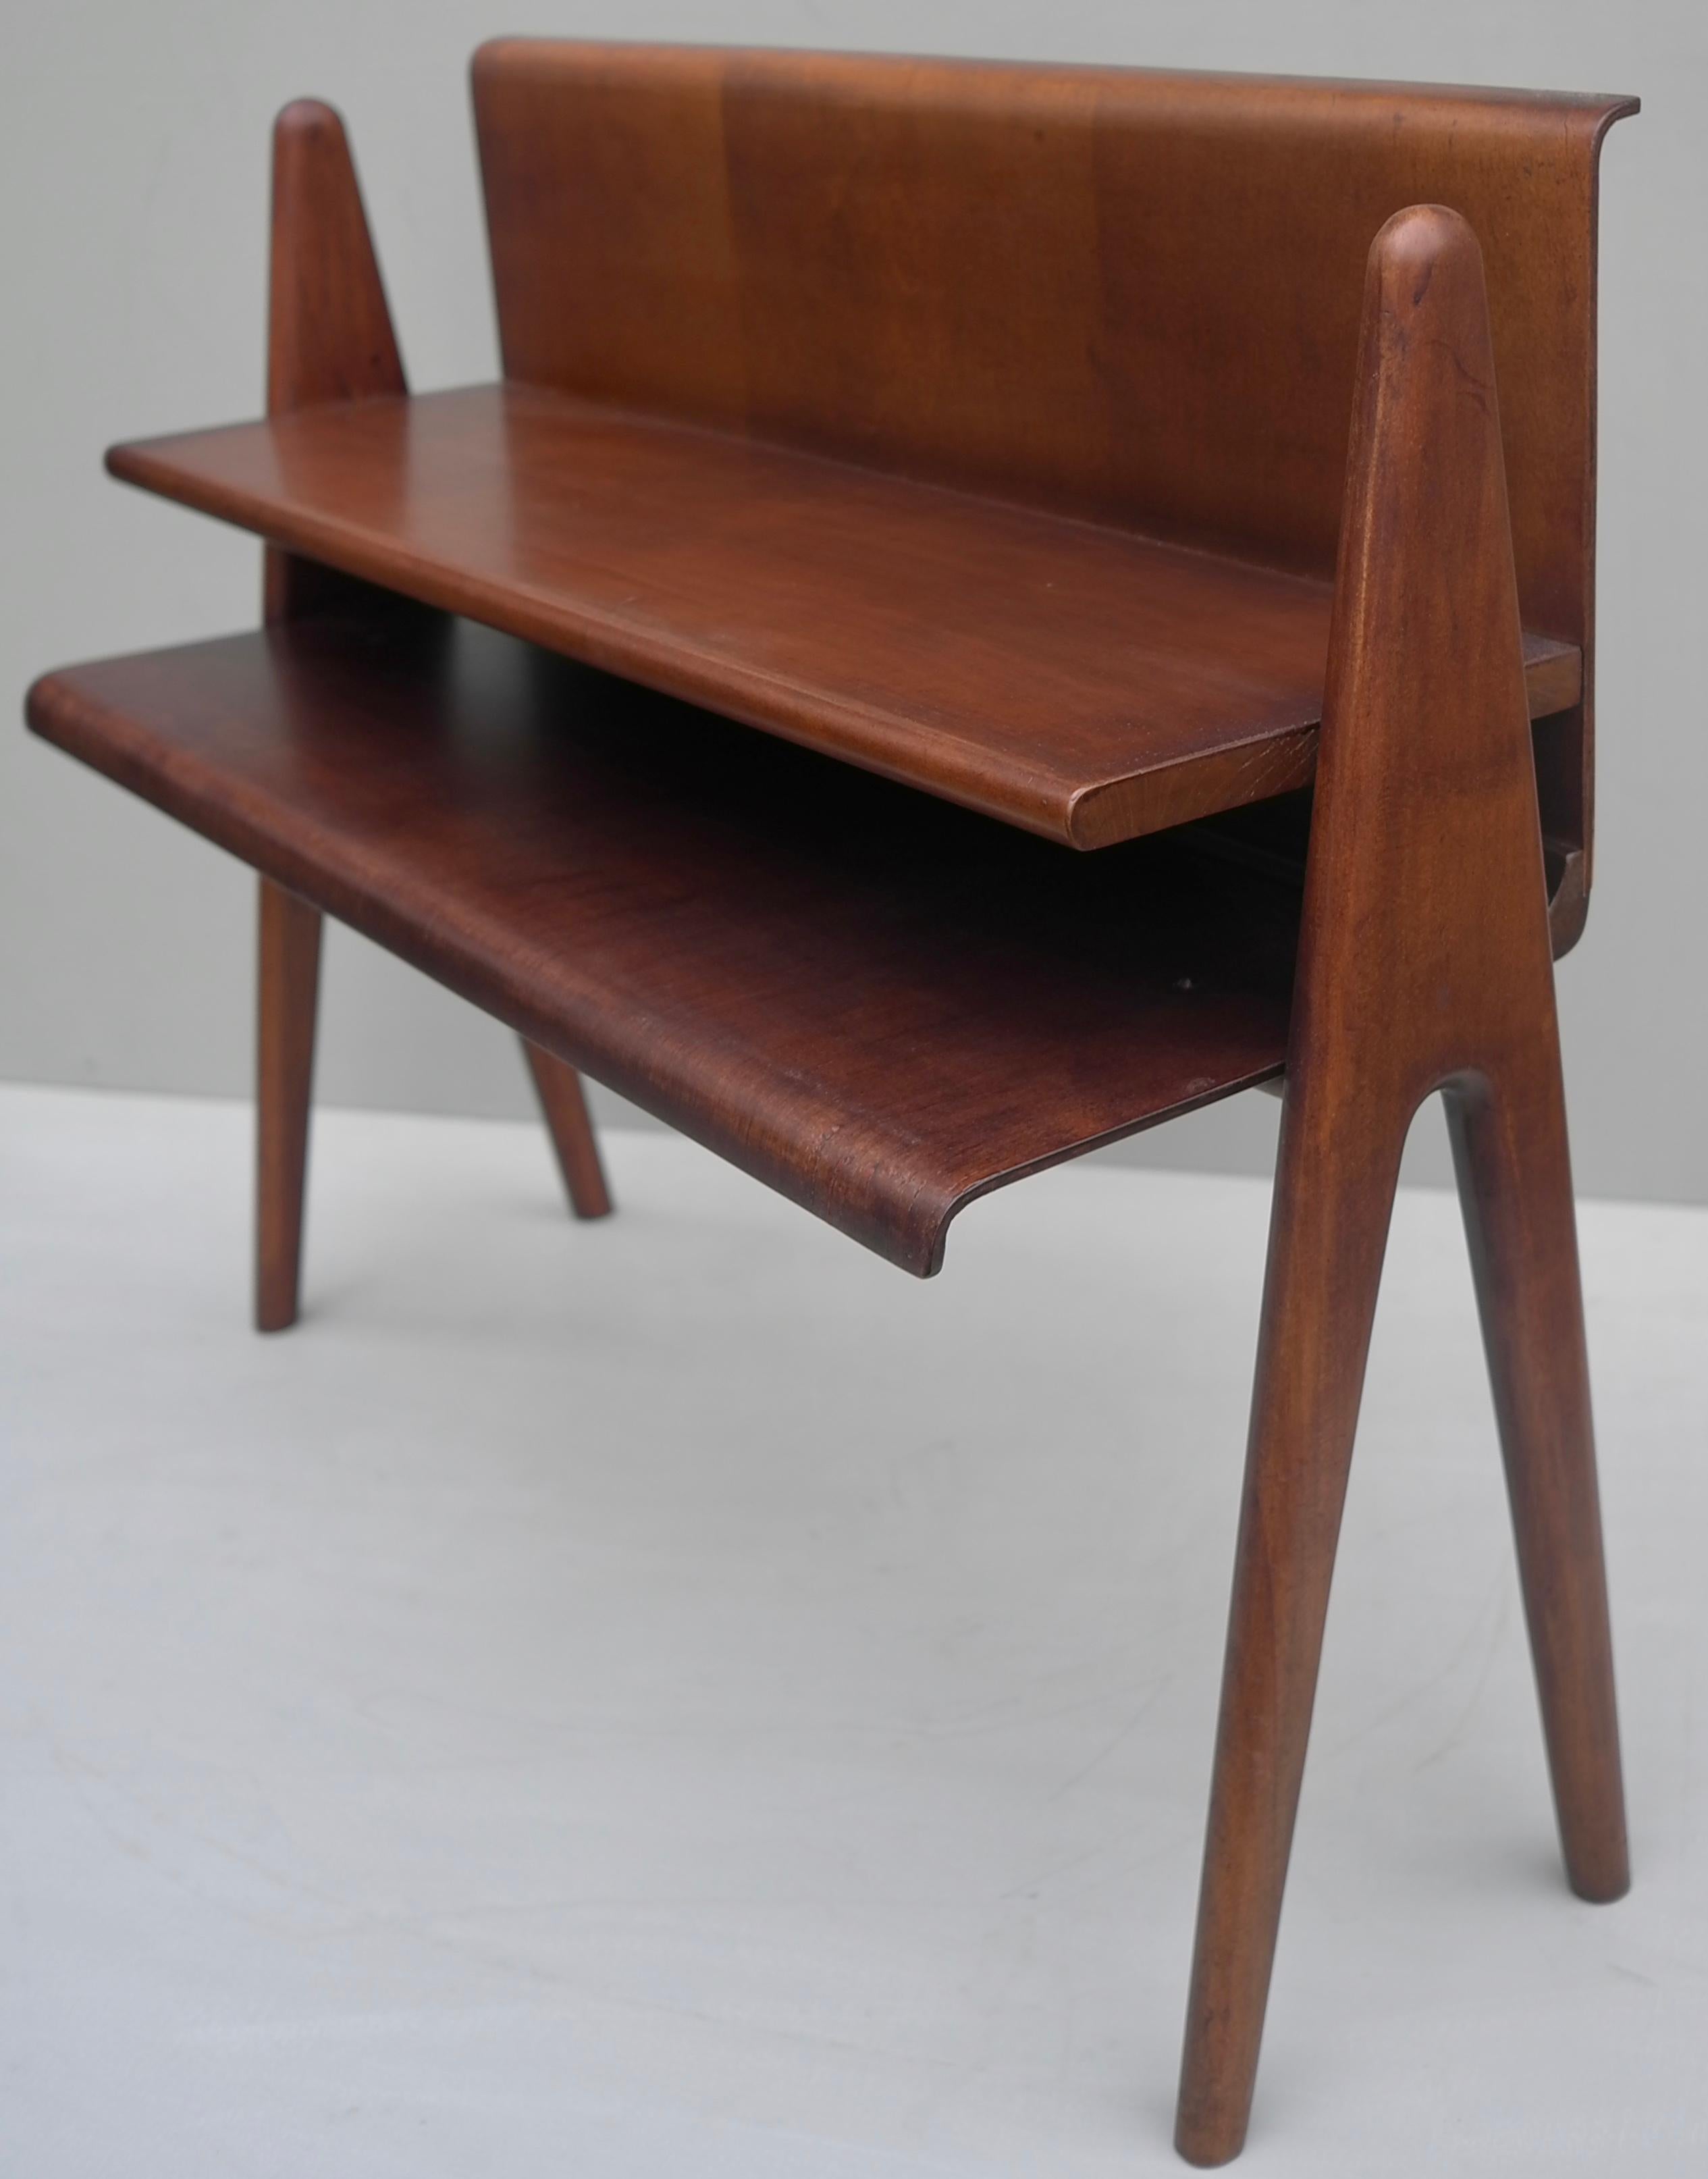 Mid-Century Modern Cesare Lacca Curved Walnut Plywood Side Table or Book Stand, Italy, 1950s For Sale